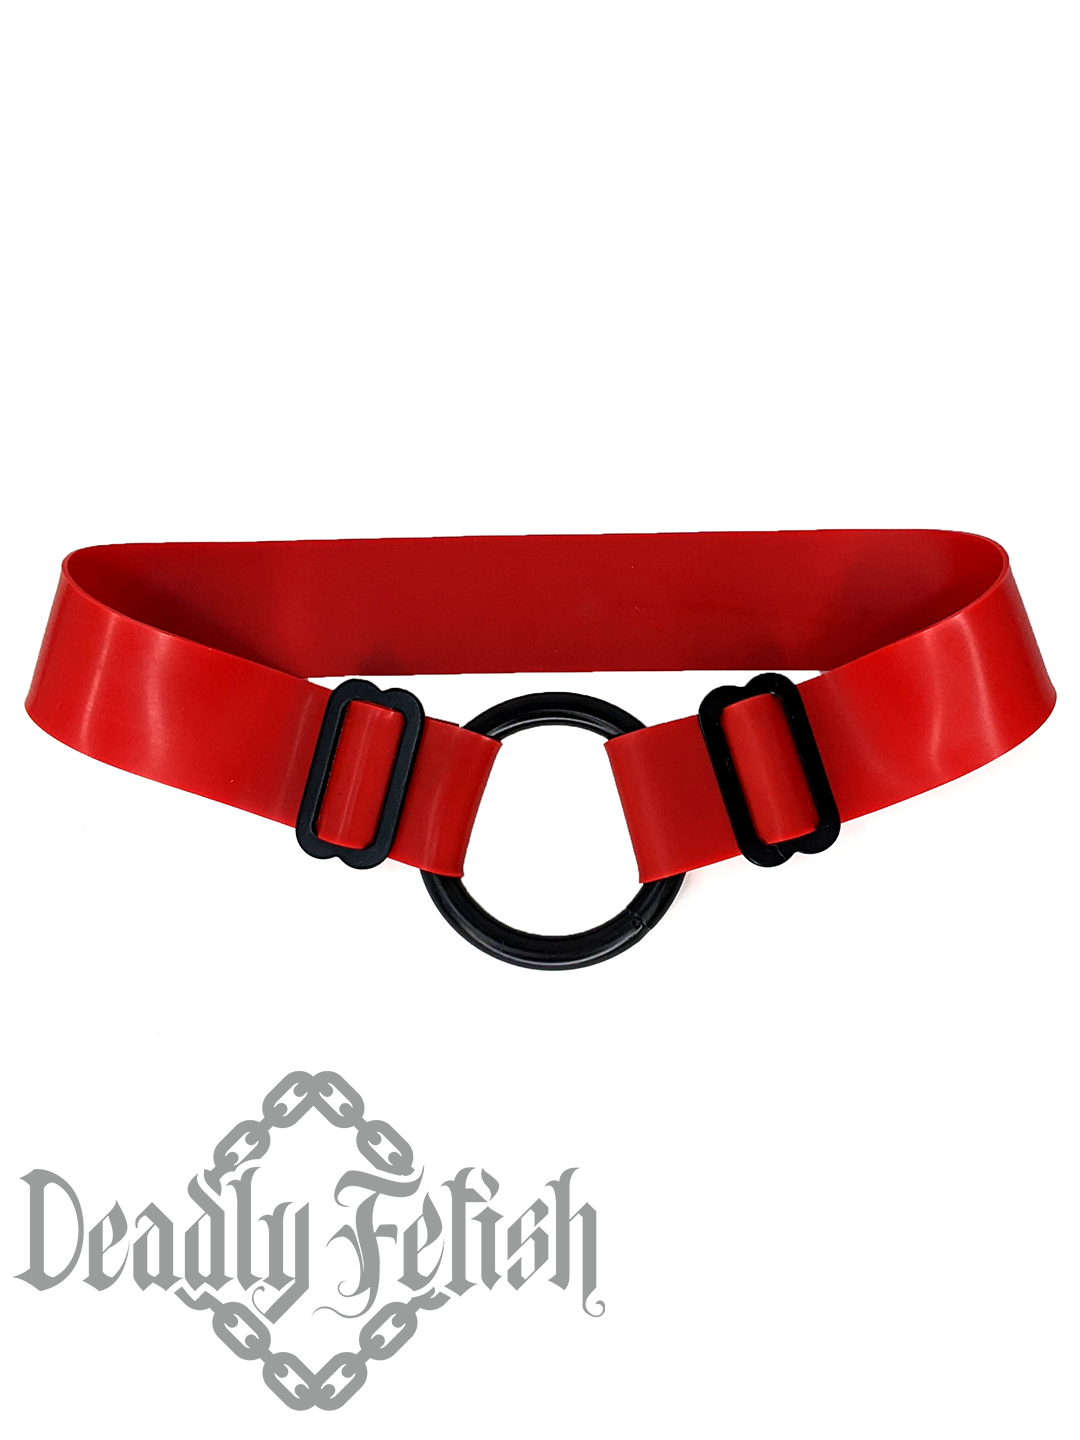 Deadly Fetish Made-to-Order Latex: Multi-Use Straps